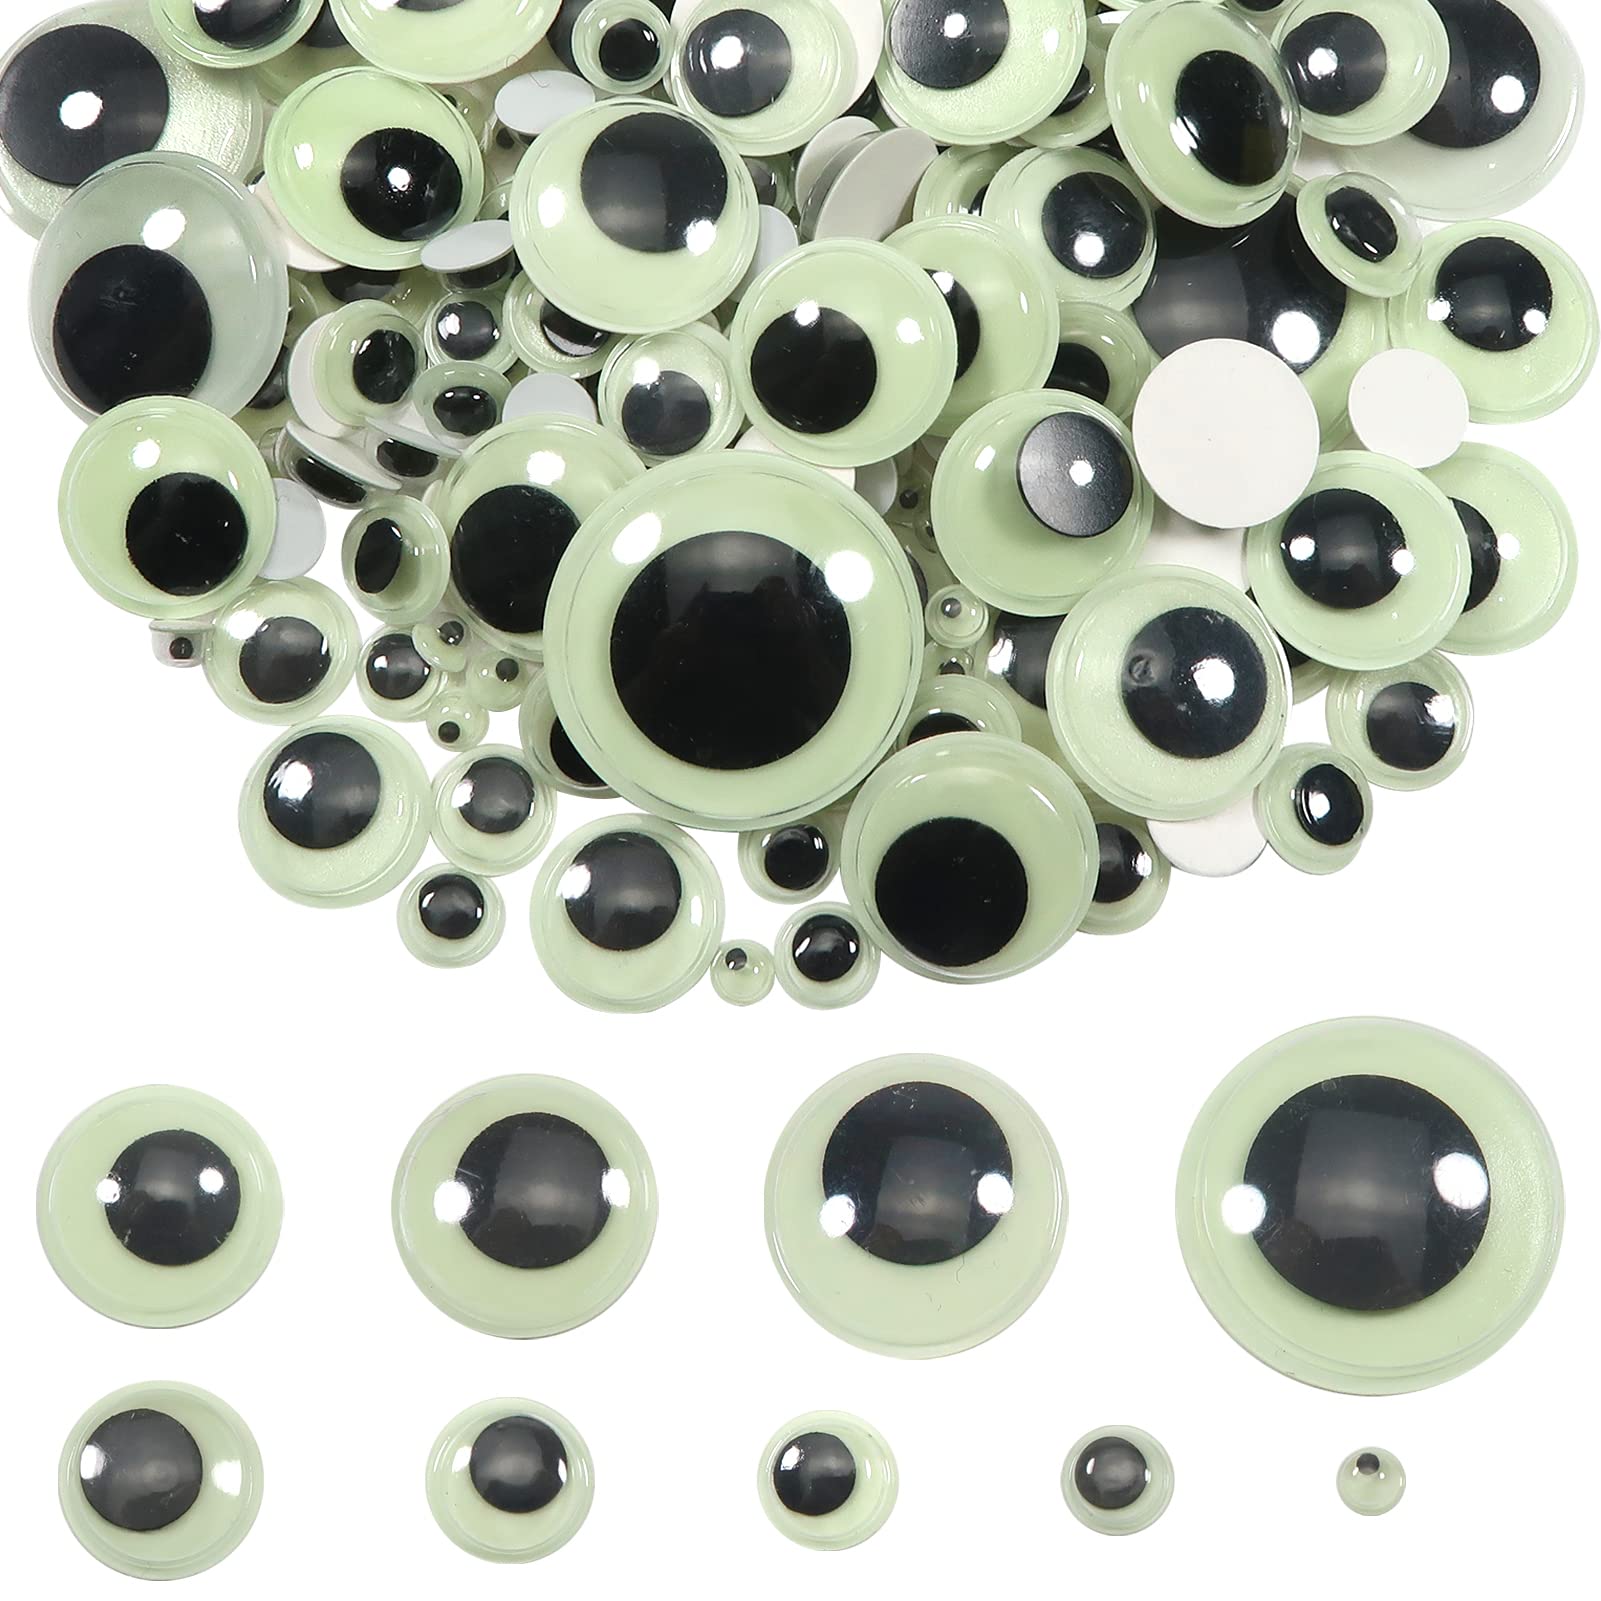 Buy Googly Eyes Stickers - Self Adhesive Wiggle Eye Stickers for